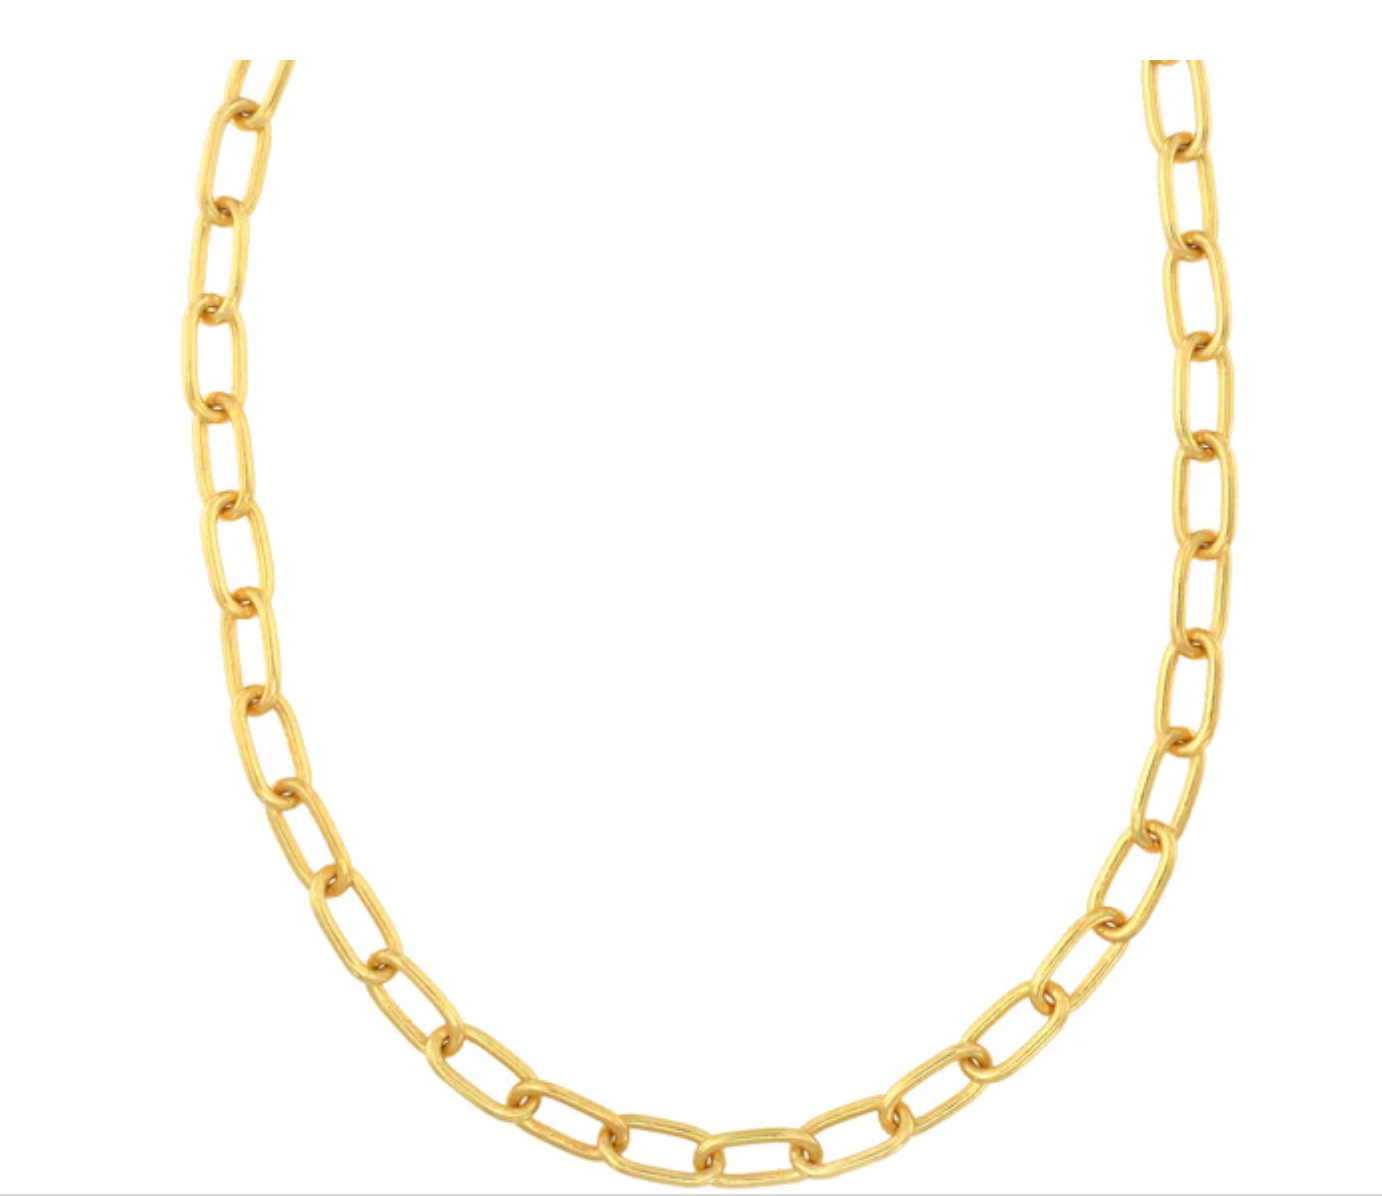 HANDMADE CABLE CHAIN - GOLD - CLEOPATRAS BLING